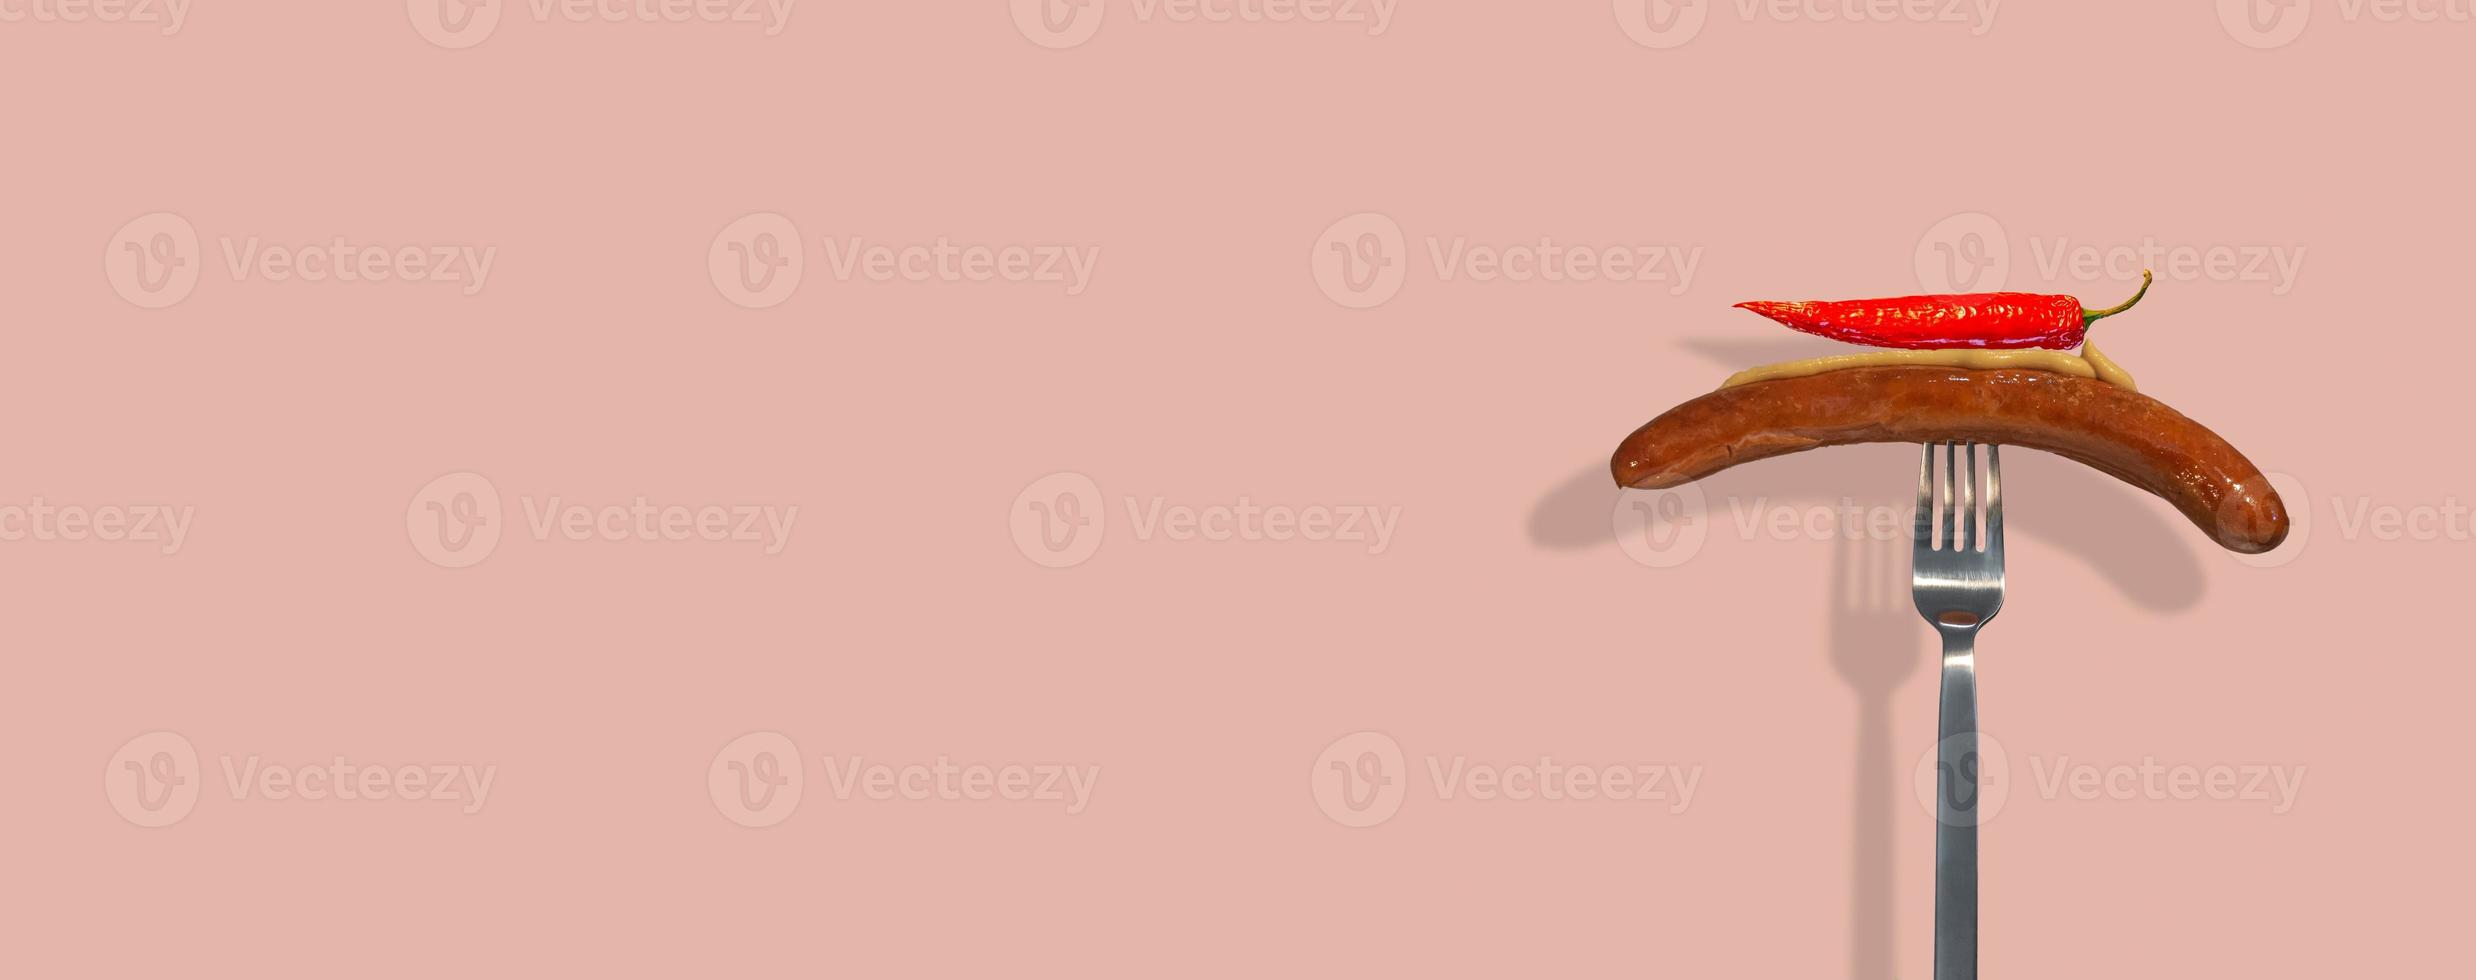 Banner with single grilled sausage with mustard on it and red hot chili pepper put on a metal modern fork at solid pink color background with copy space for text. Concept of street food and cuisine. photo